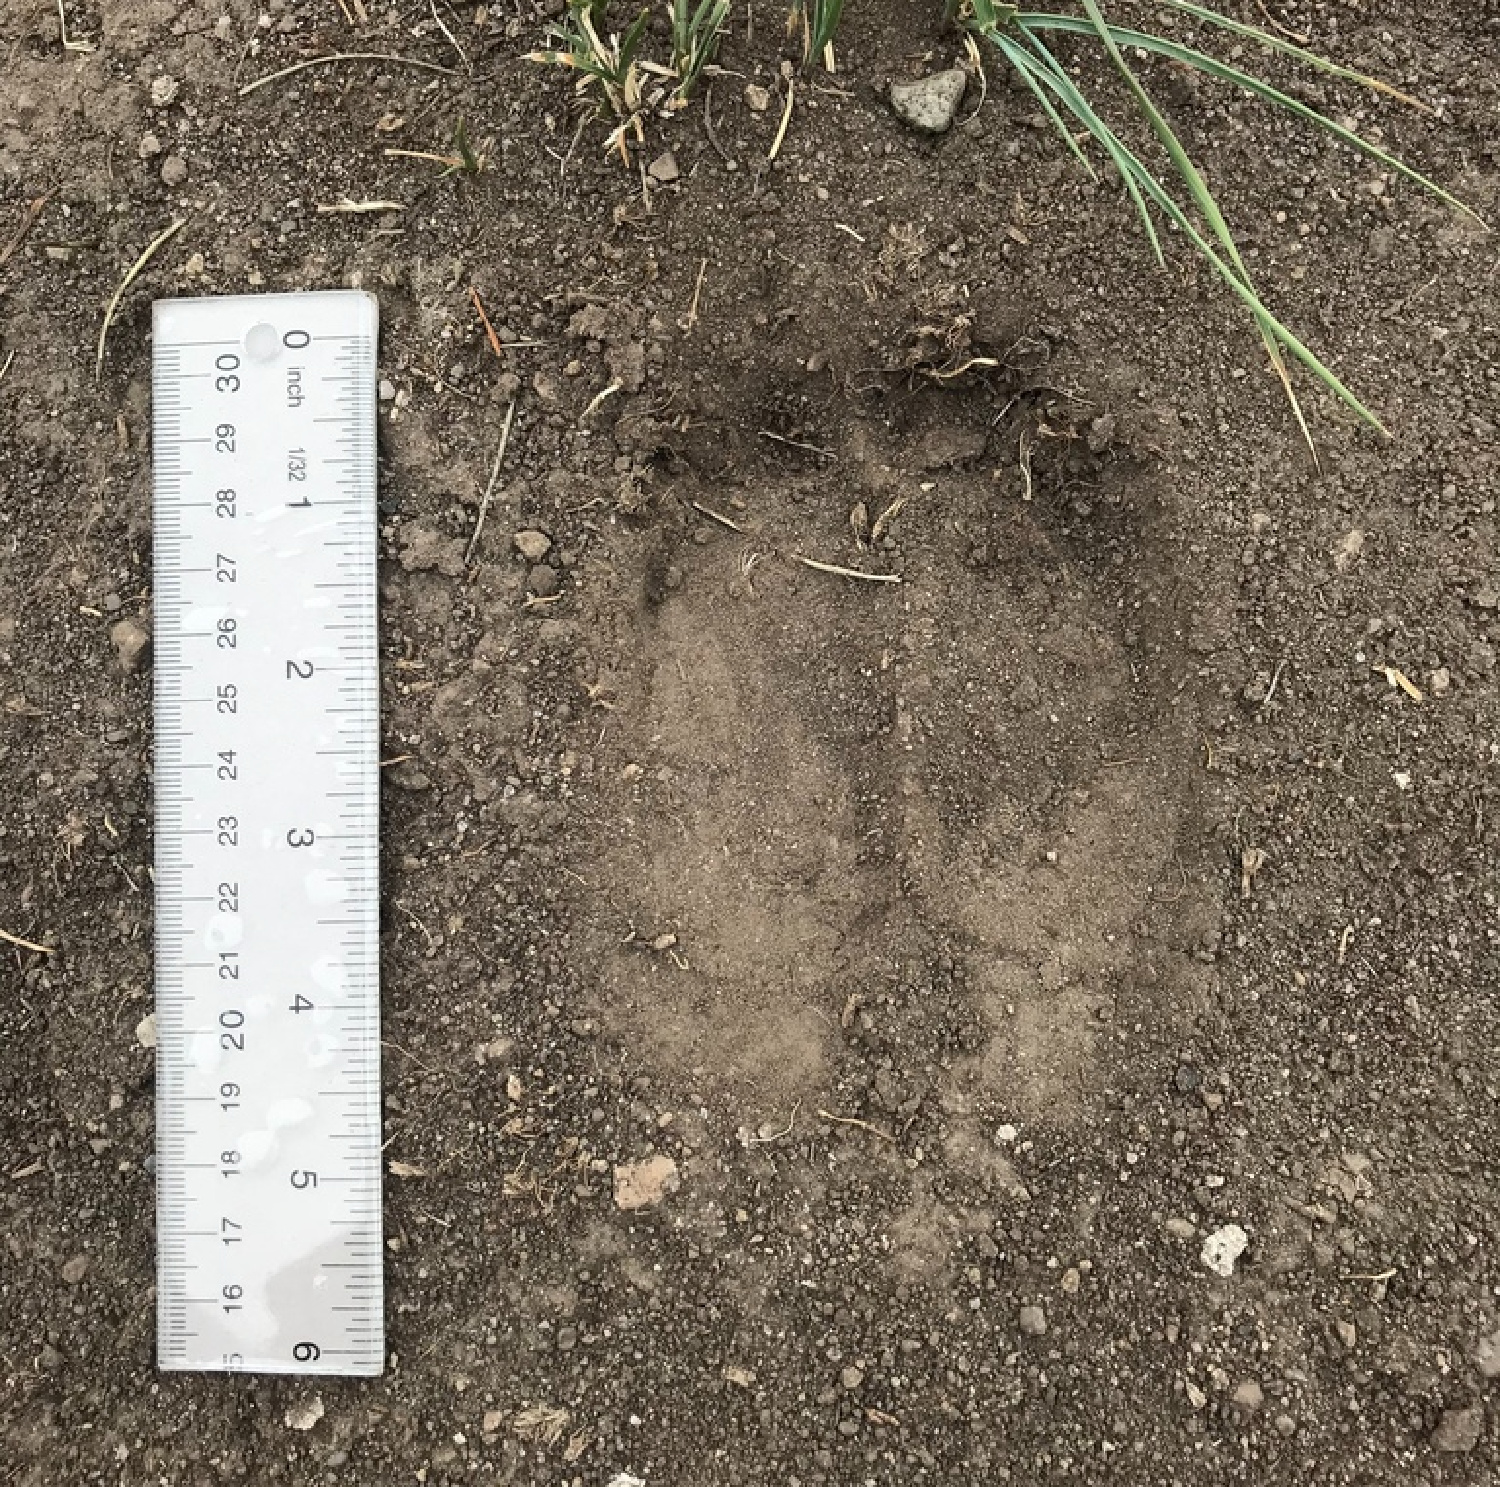 An elk track is printed in dirt with a ruler.